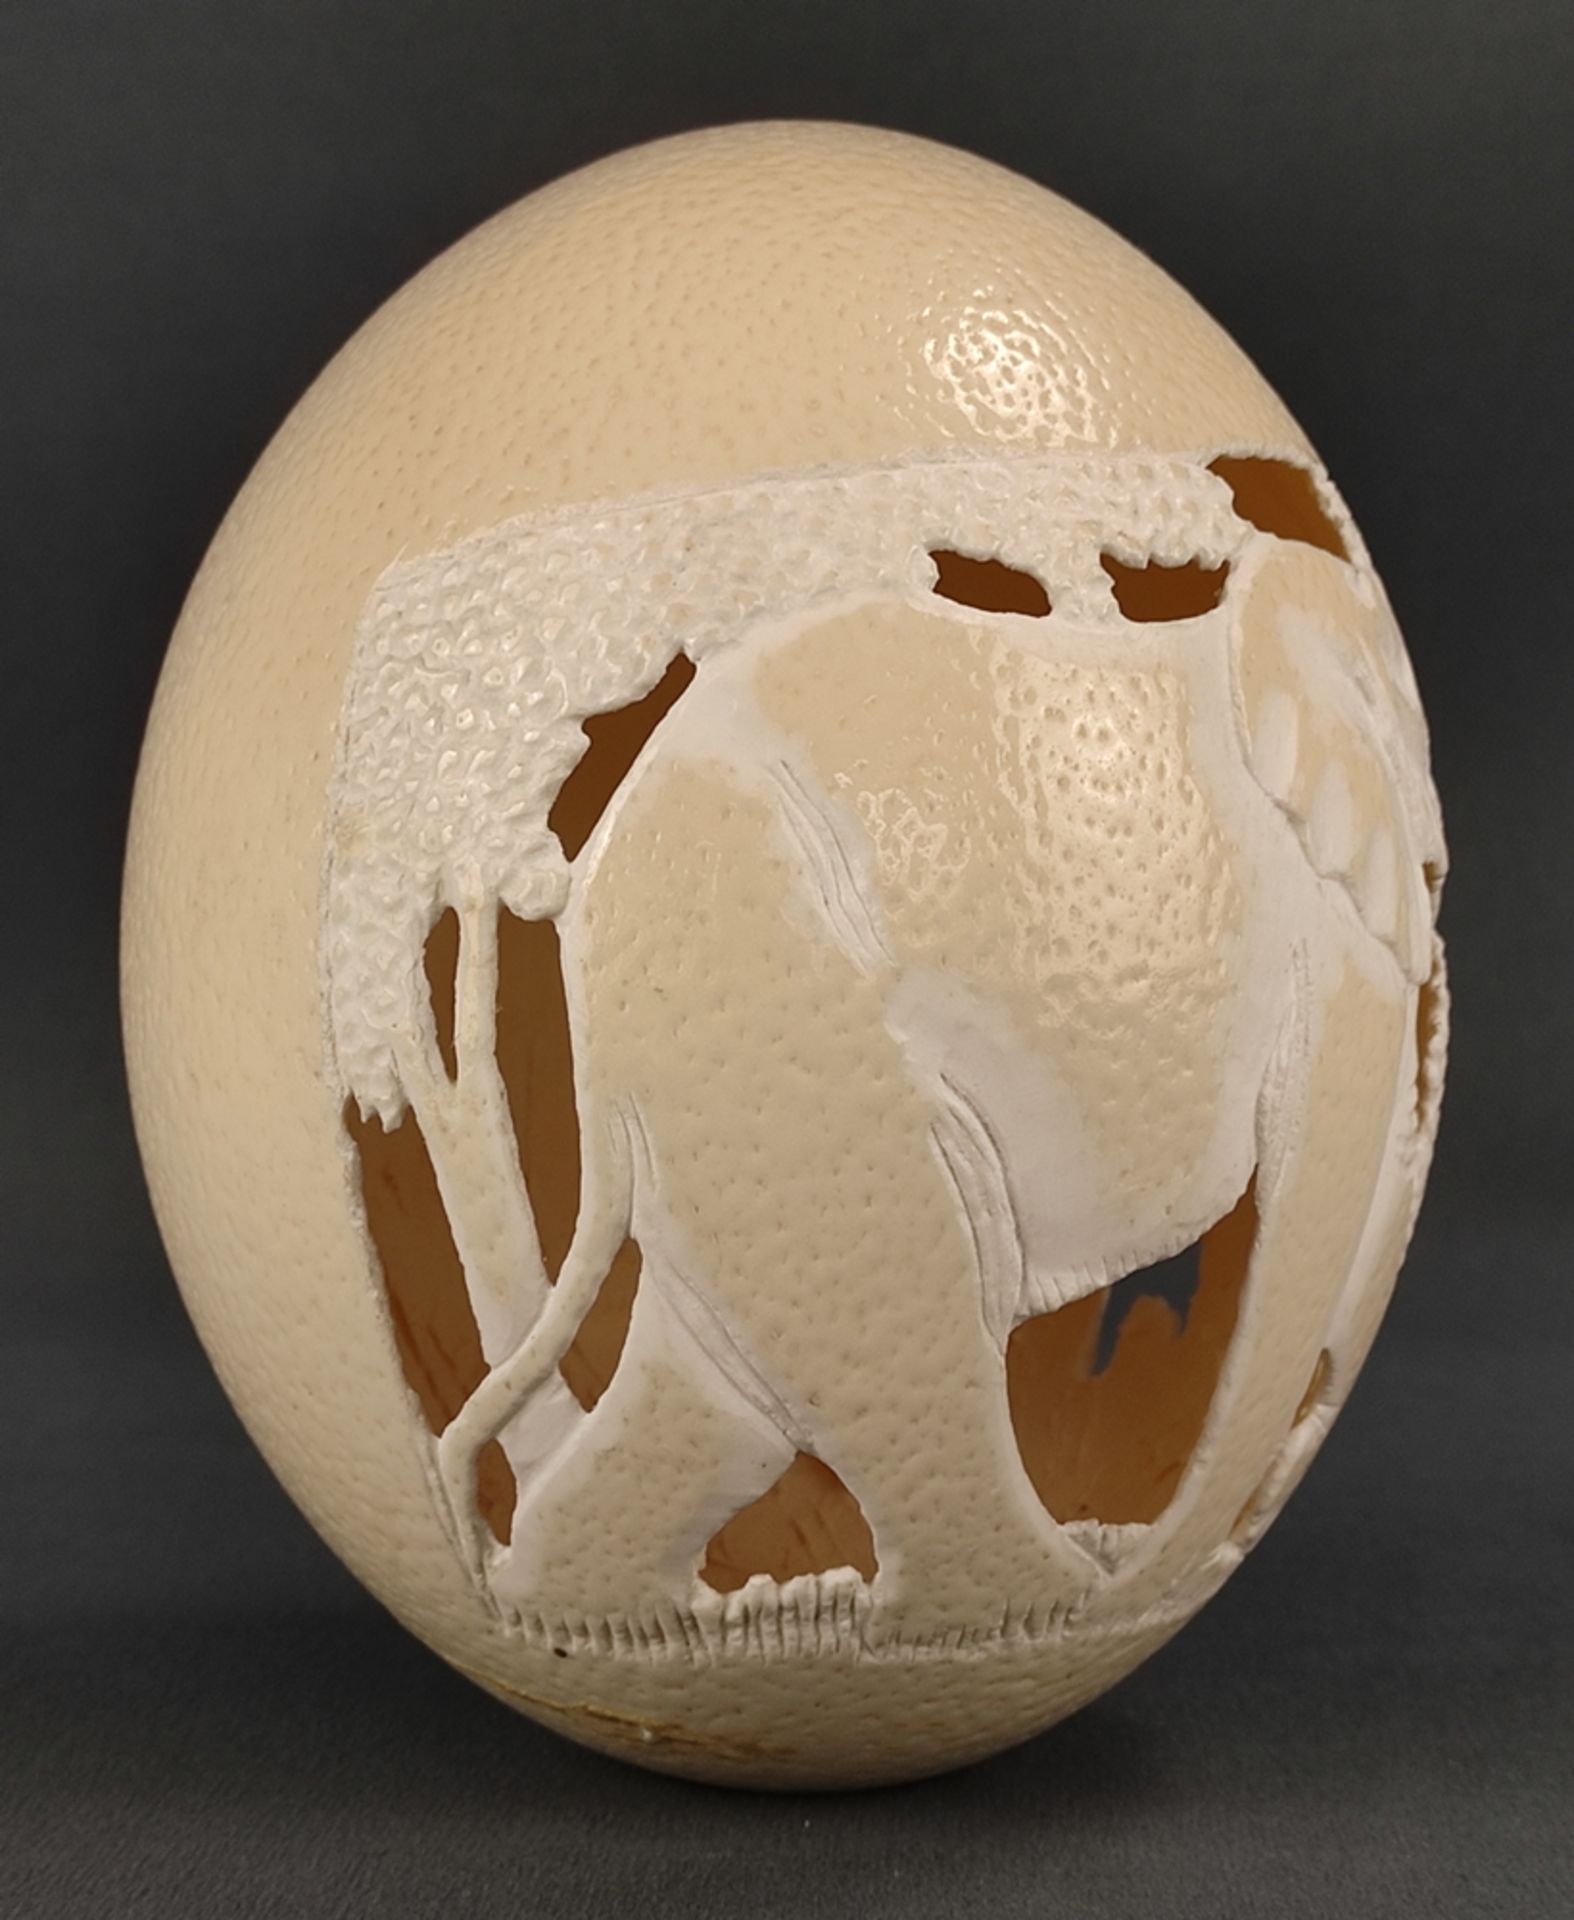 Ostrich egg carved in relief as elephant and trees, Africa, l 16 cm - Image 2 of 2